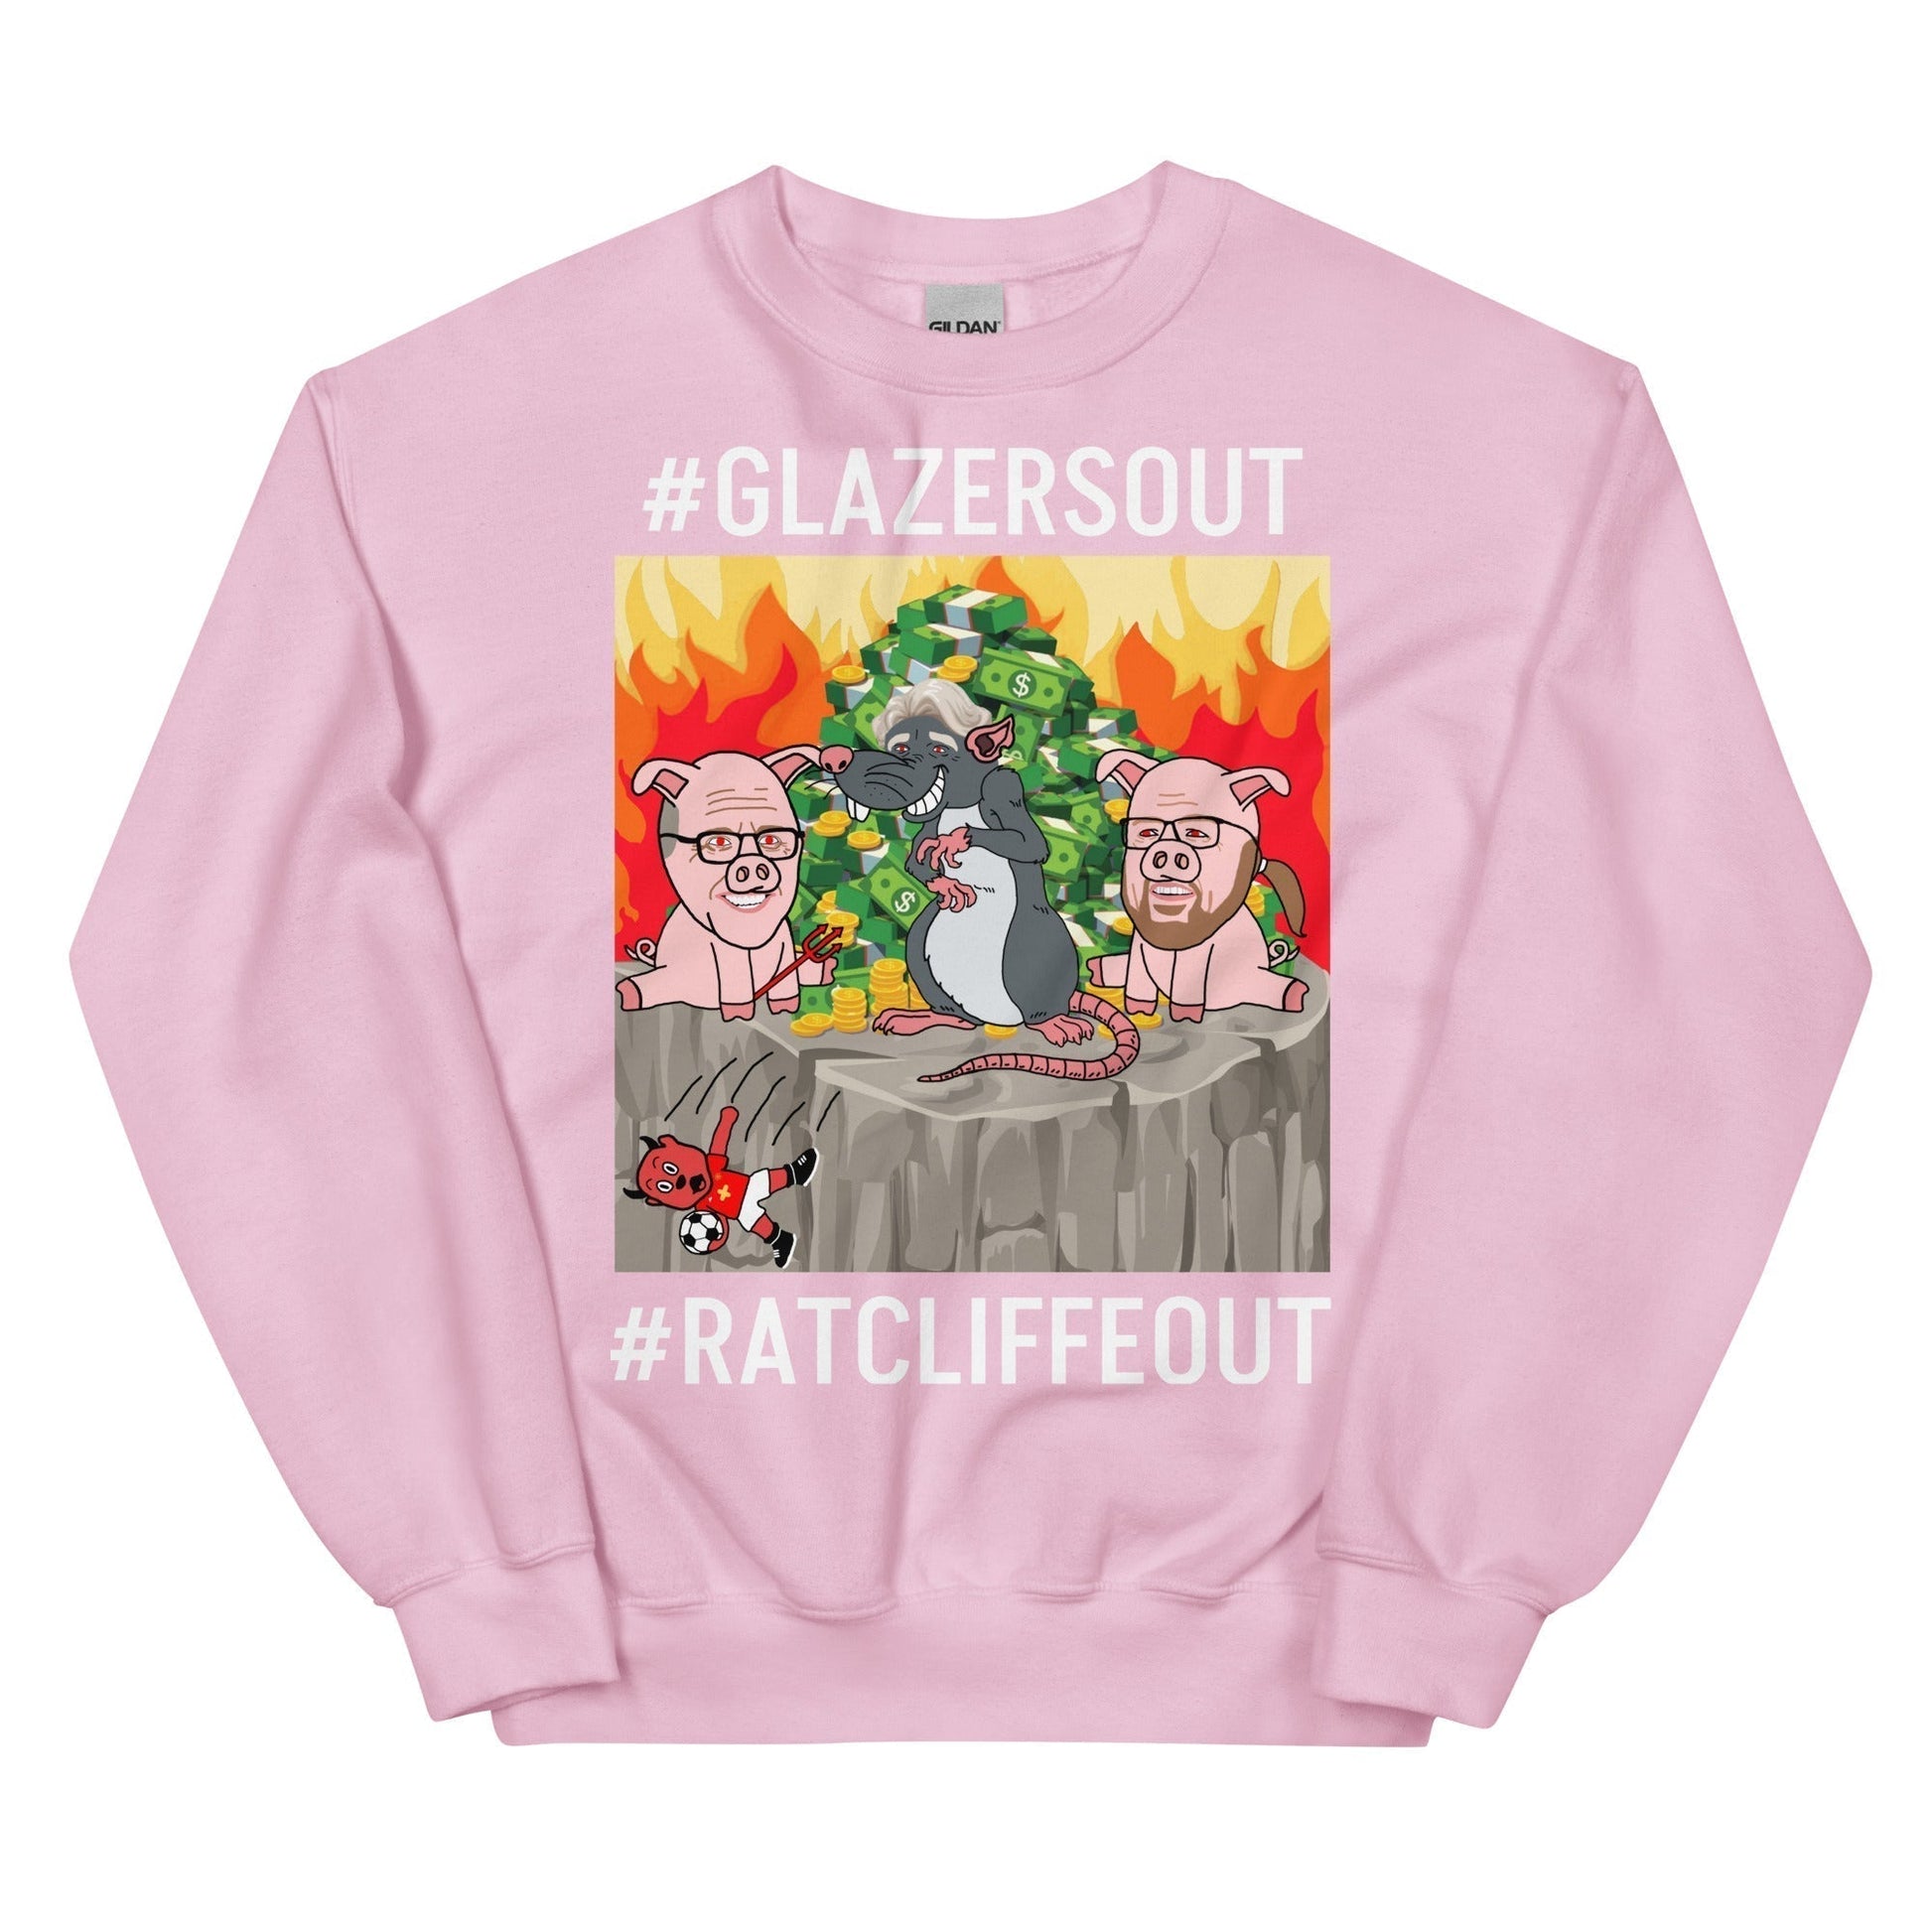 Manchester United Ratcliffe Out, Glazers Out Unisex Sweatshirt, White Letters, #GlazersOut #RatcliffeOut Next Cult Brand Football, GlazersOut, Manchester United, RatcliffeOut